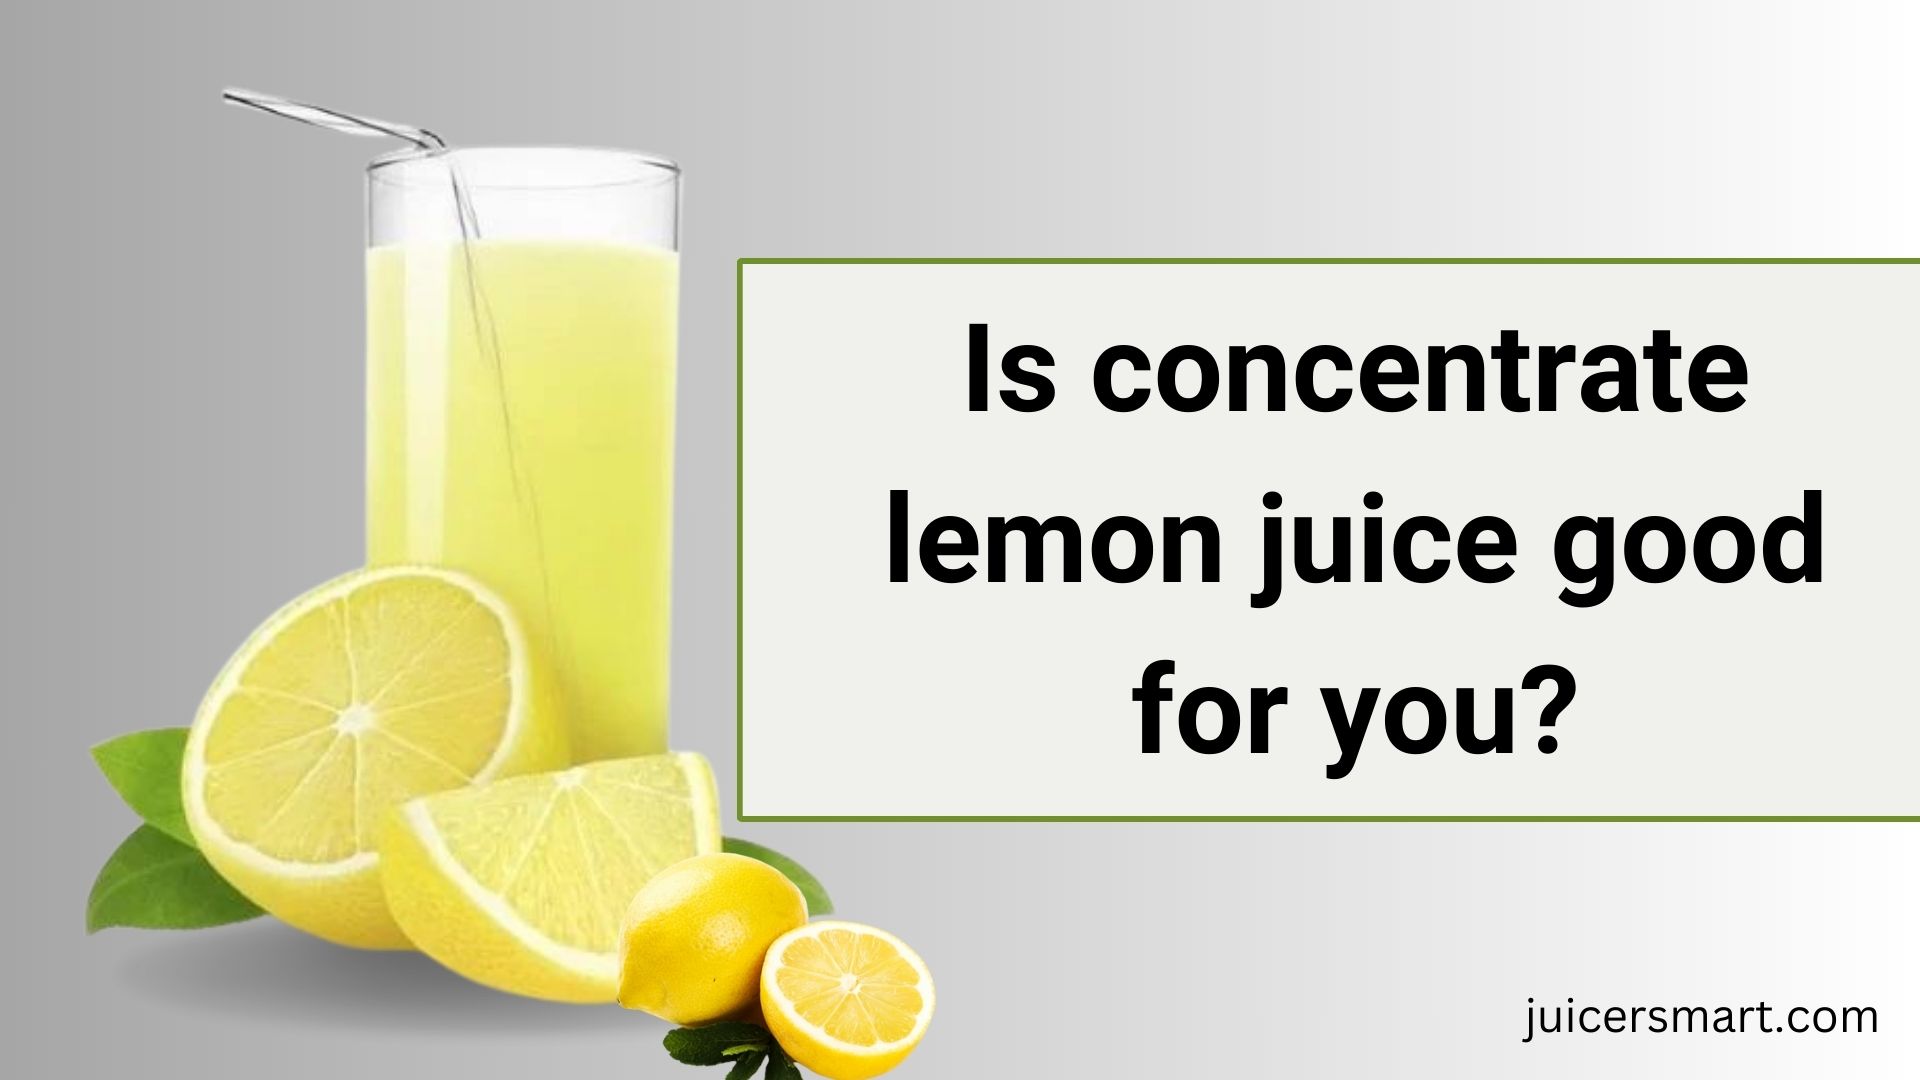 Is concentrate lemon juice good for you?